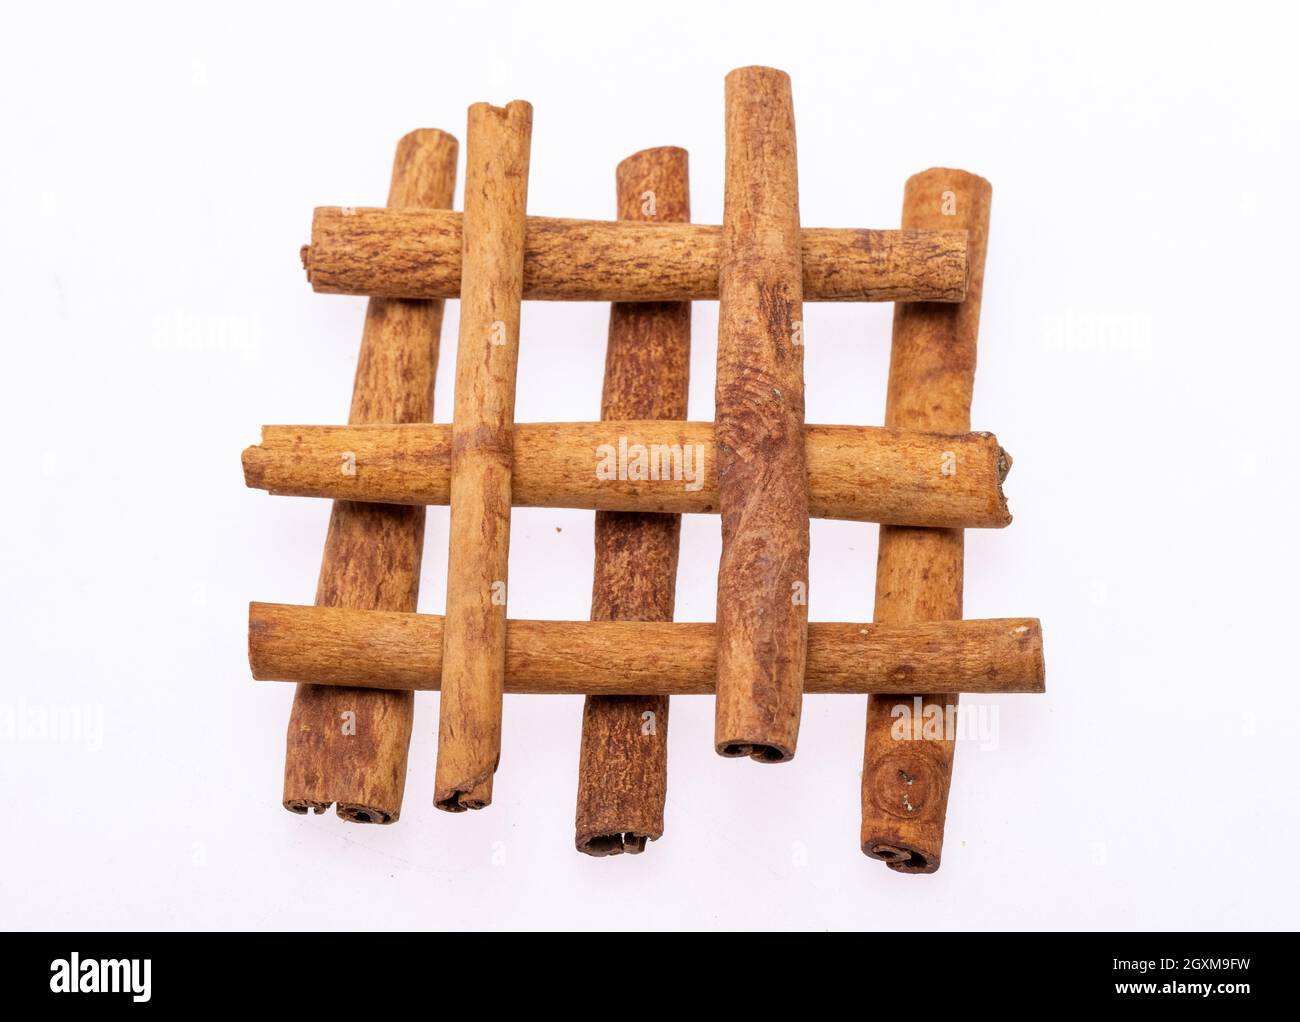 Cinnamon sticks, classic spice from the inner bark of tropical Asian trees, flavorful and aromatic for cooking, baking, health food and medicinal uses Stock Photo